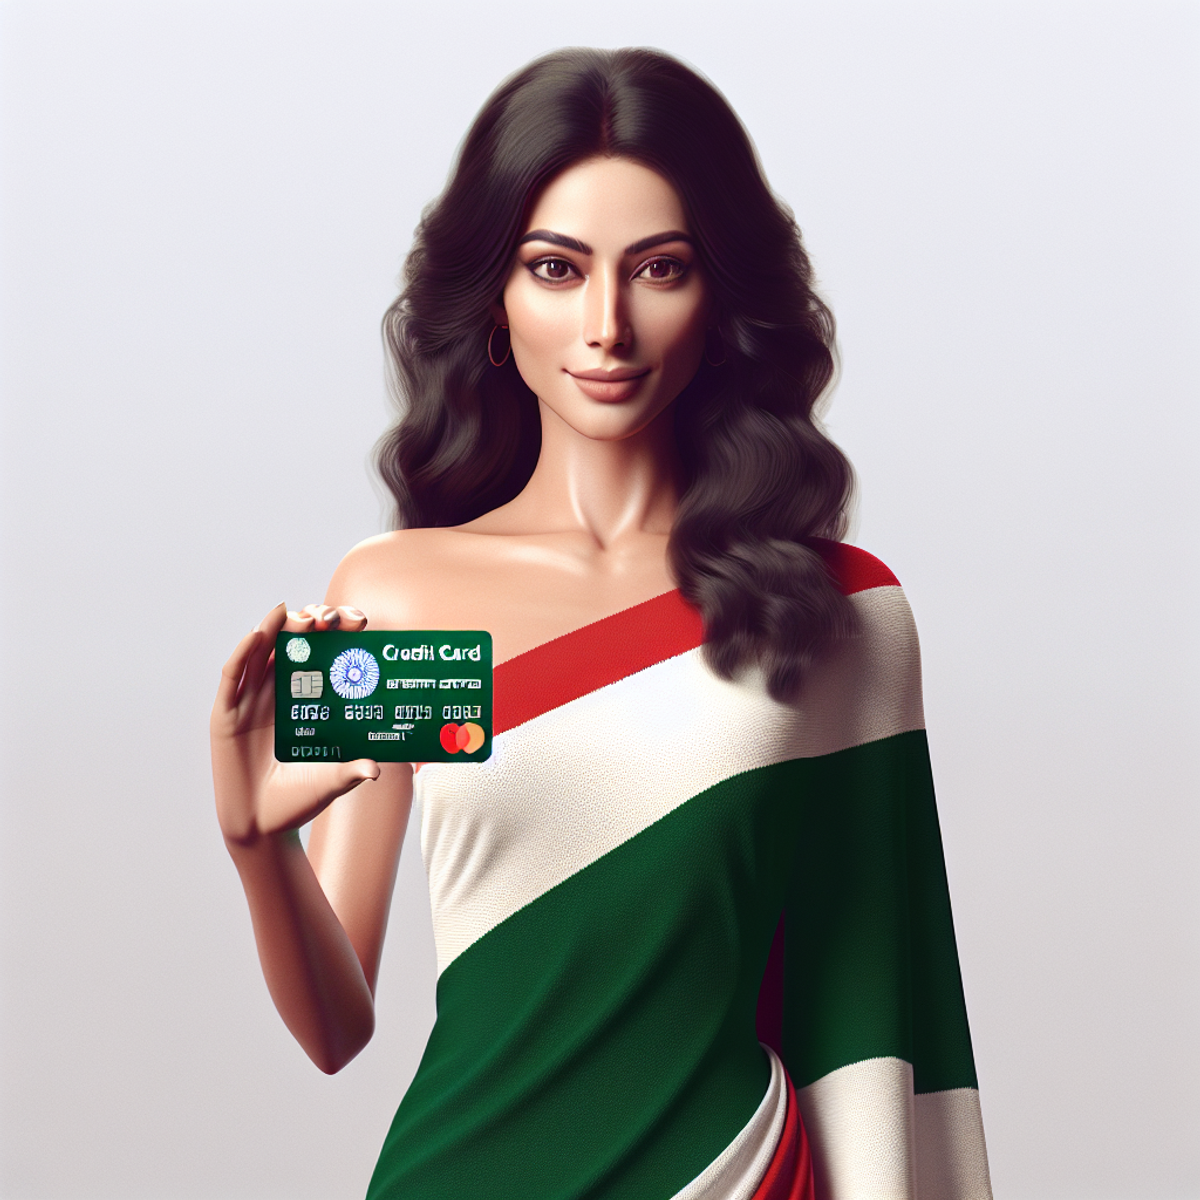 A South Asian woman standing confidently while holding a credit card in the colors of West Bengal (green, white, and red), symbolizing empowerment and financial inclusion.